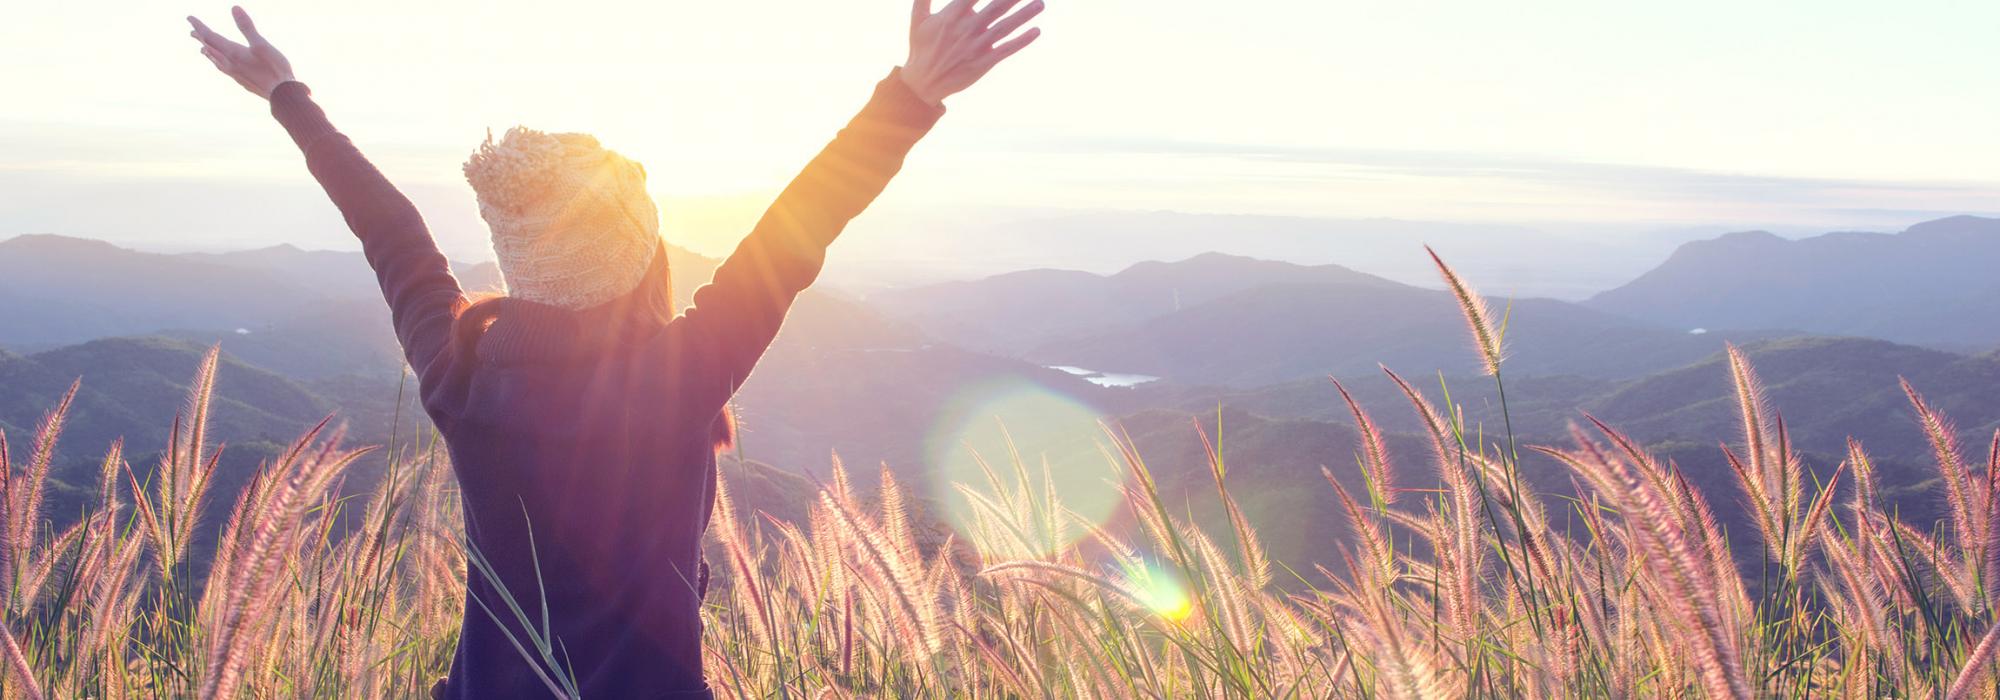 Woman with arms up looking into distance over eastern mountains